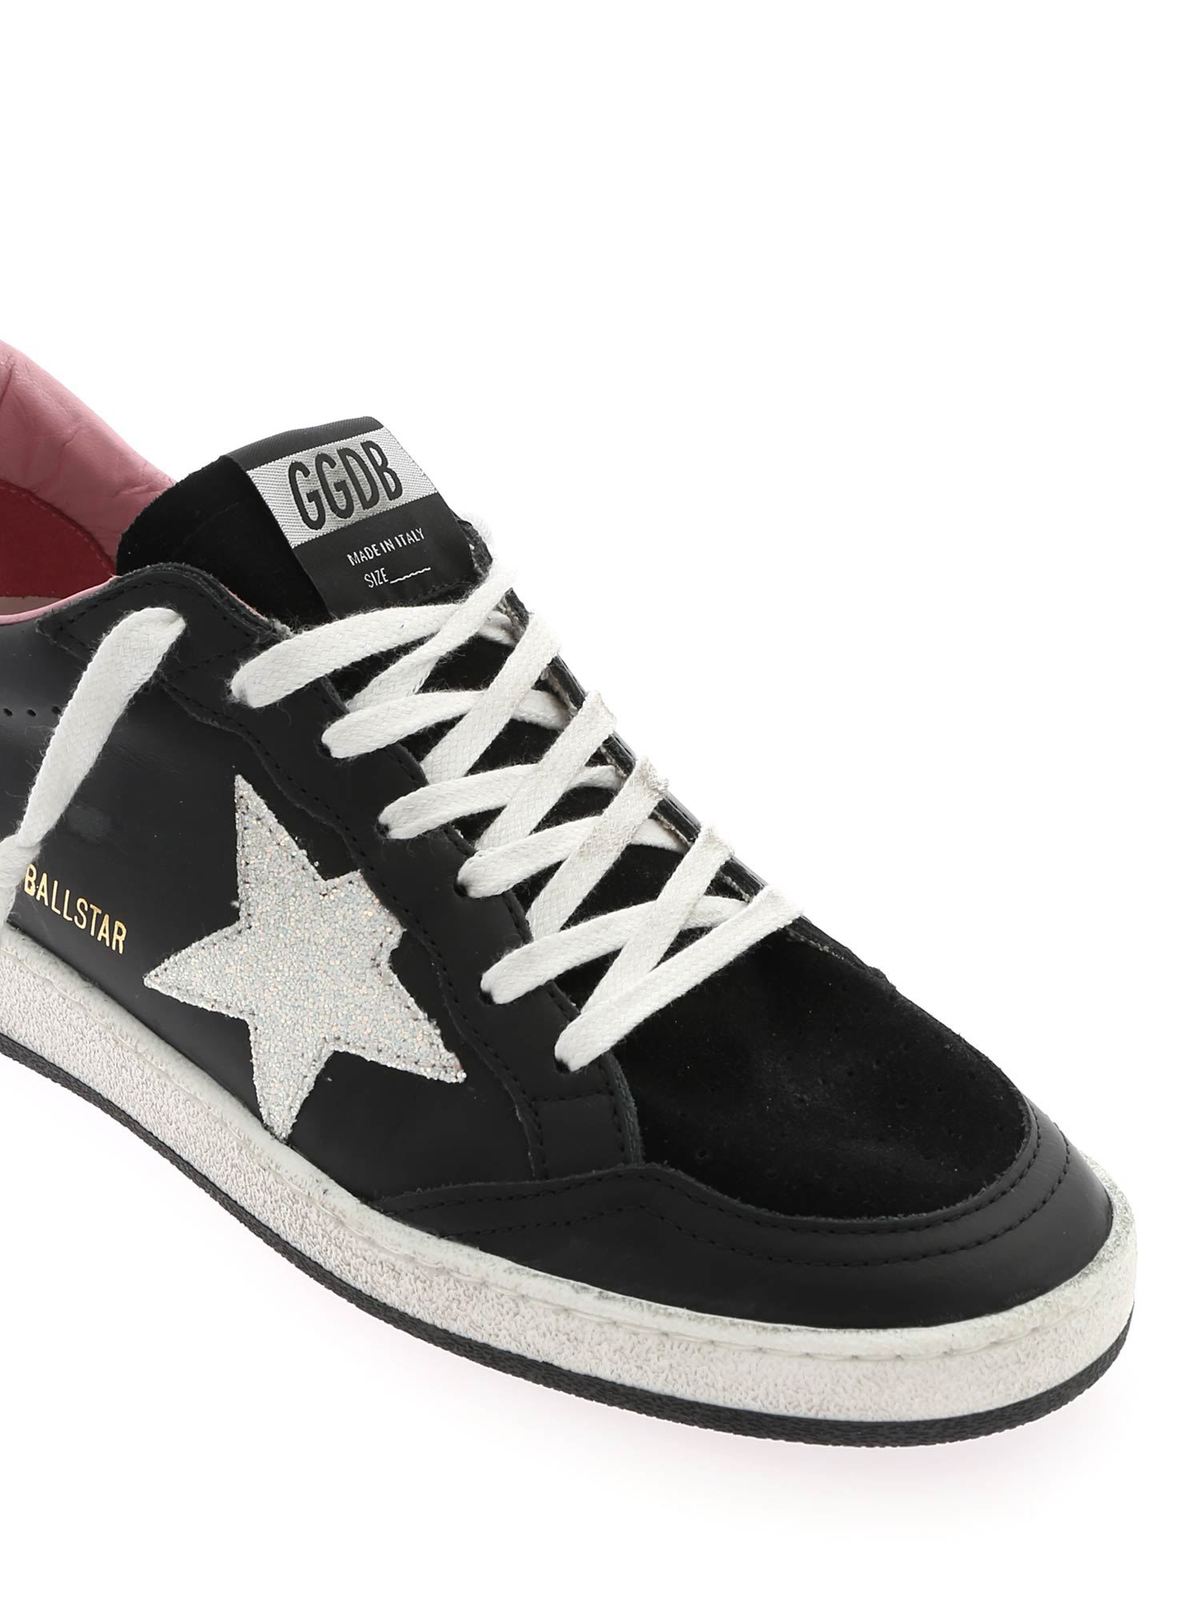 Trainers Golden Goose - Ball Star sneakers black with glitter logo G36WS592A42